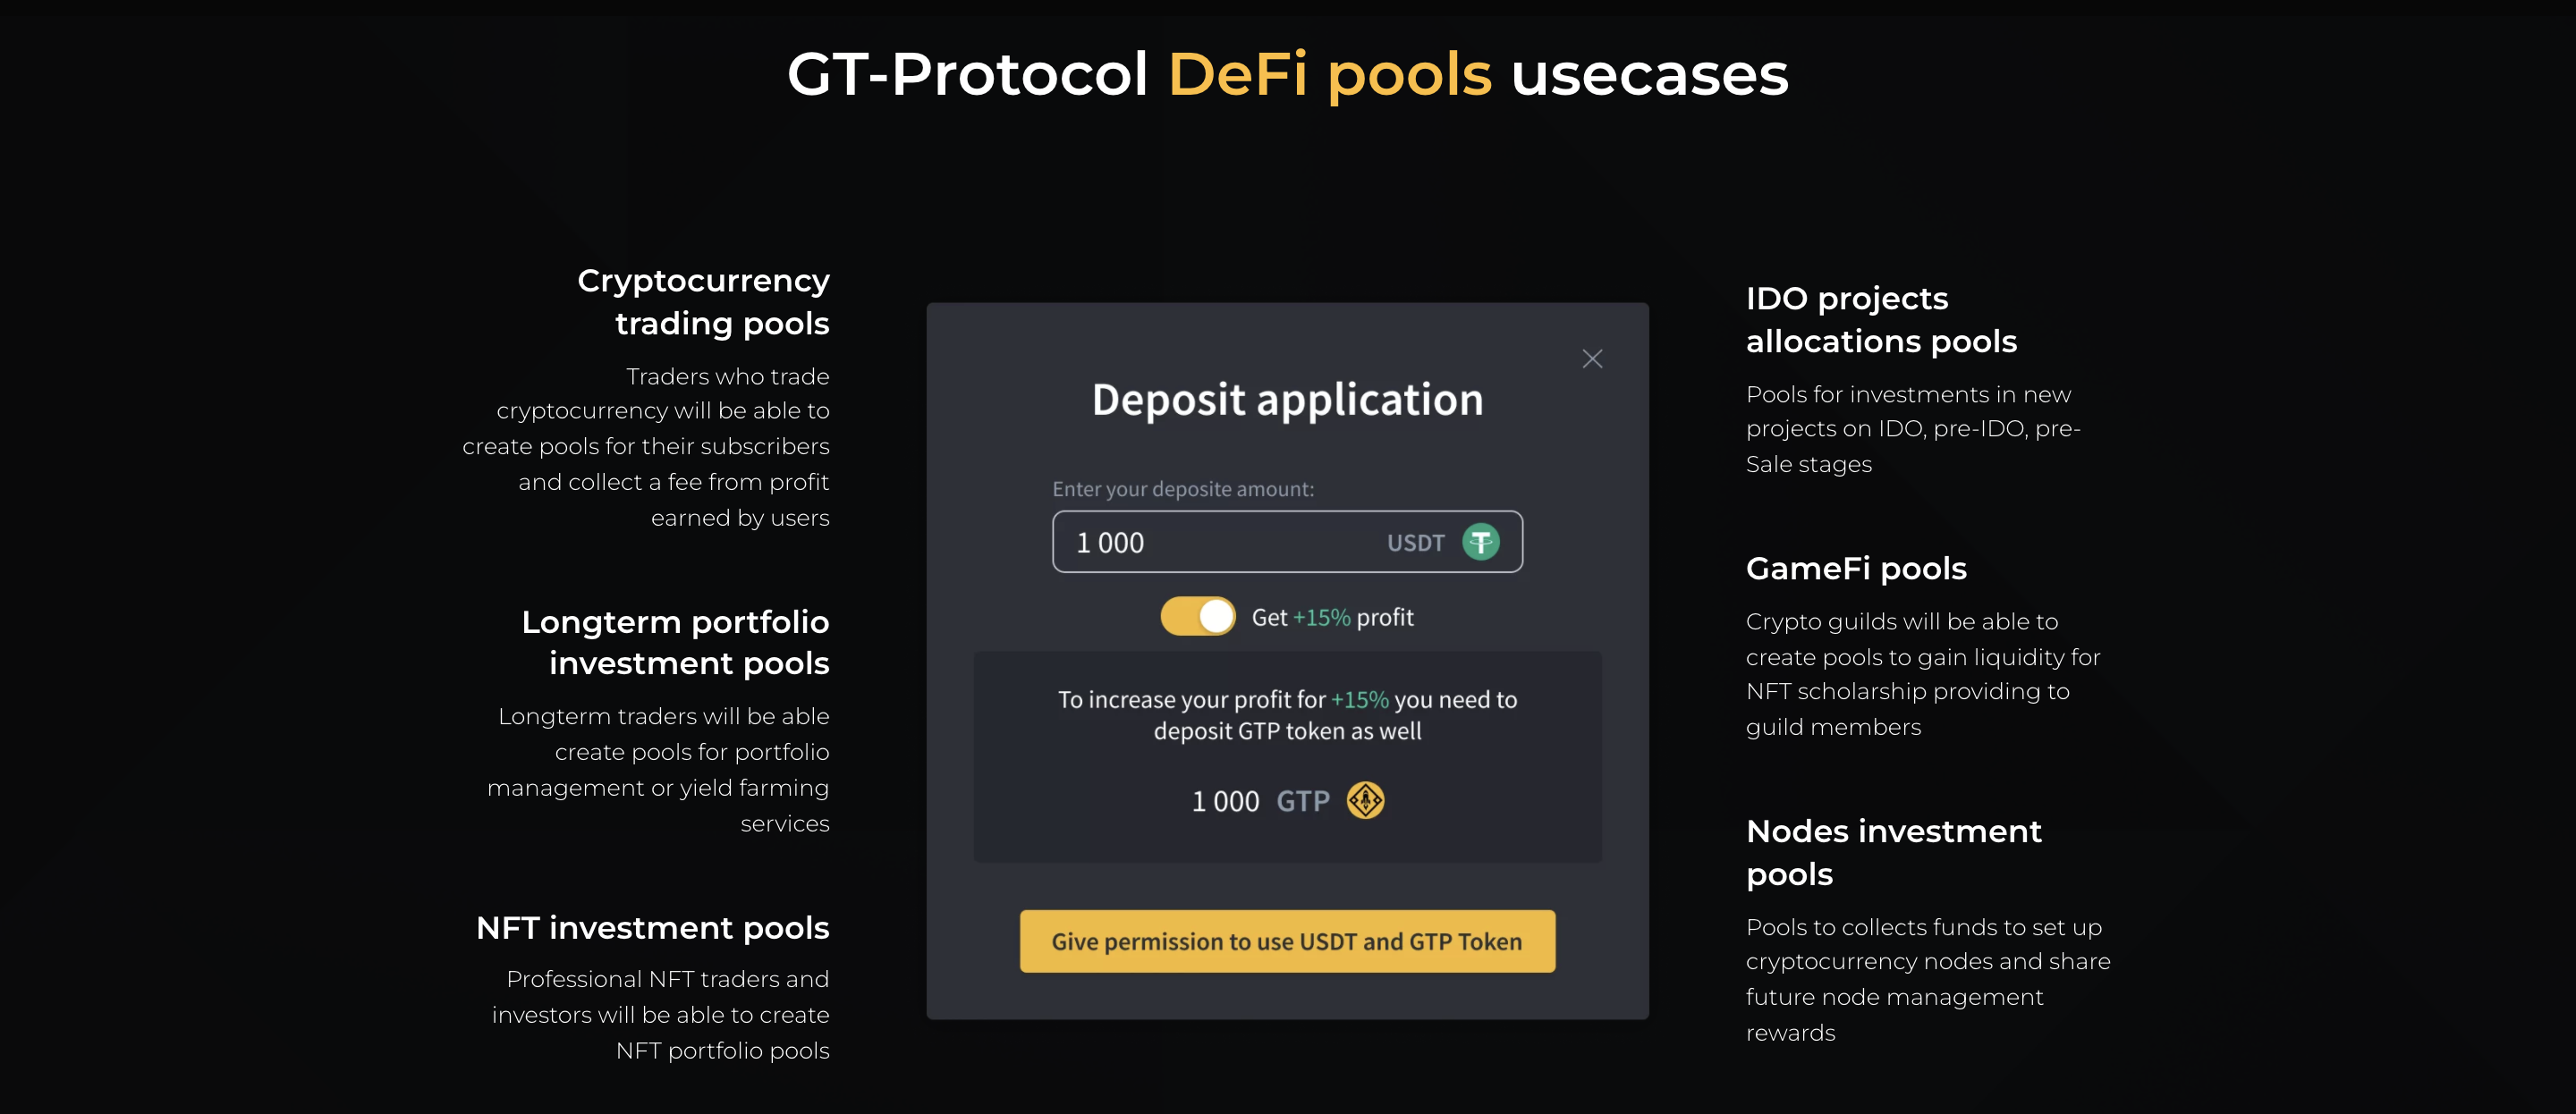 GT-Protocol Use Cases